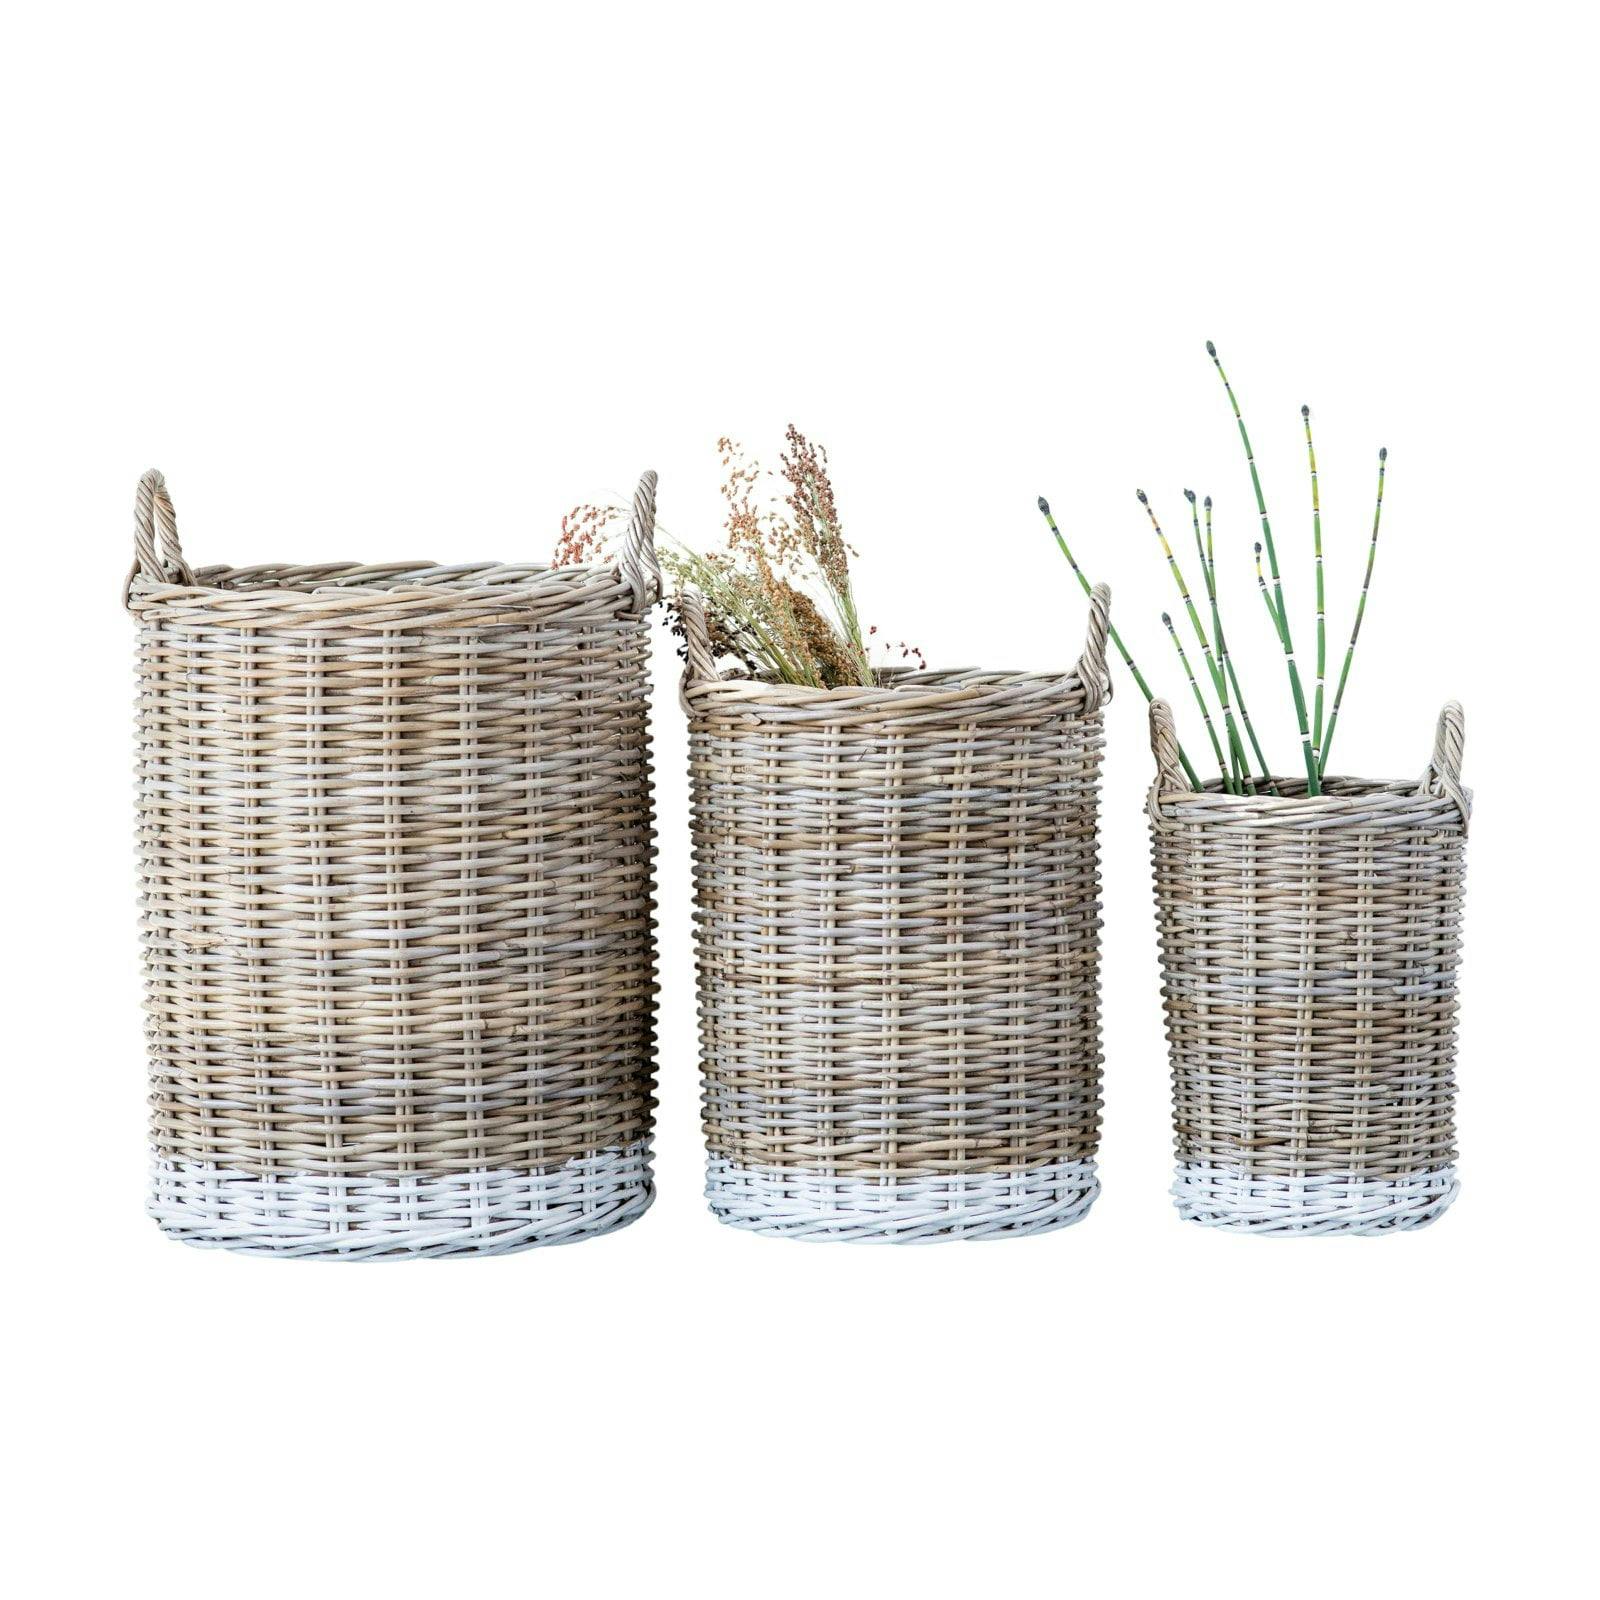 Natural Rattan Round Storage Baskets with White Dipped Base - Set of 3